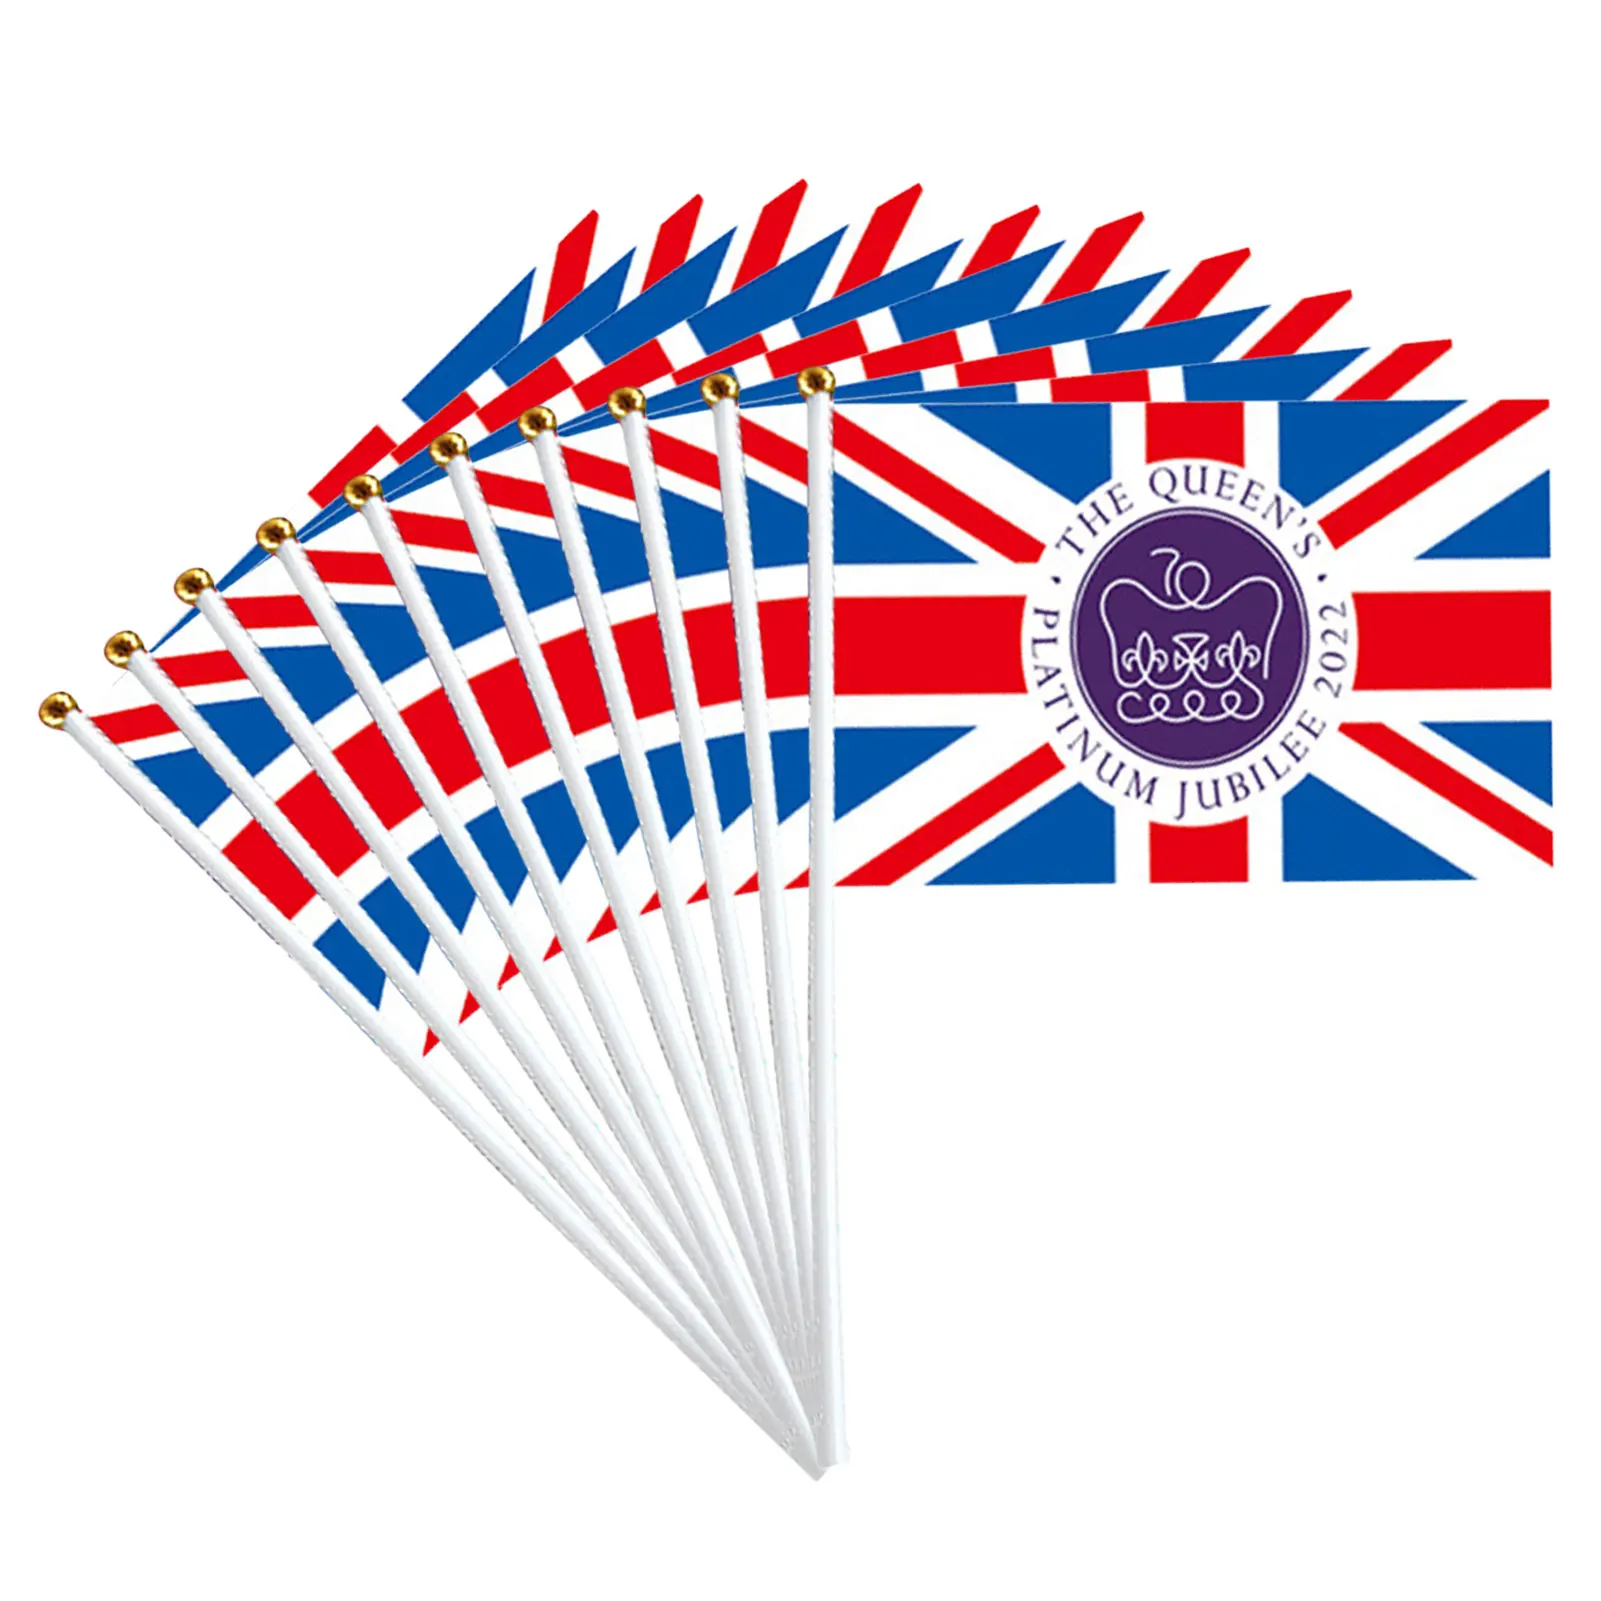 

5x8in Queens Plat-inum Jubilee 10pcs Union Jack Hand Waving Flags Featuring Her Majesty The Queen 2022 70th Anniversary GB